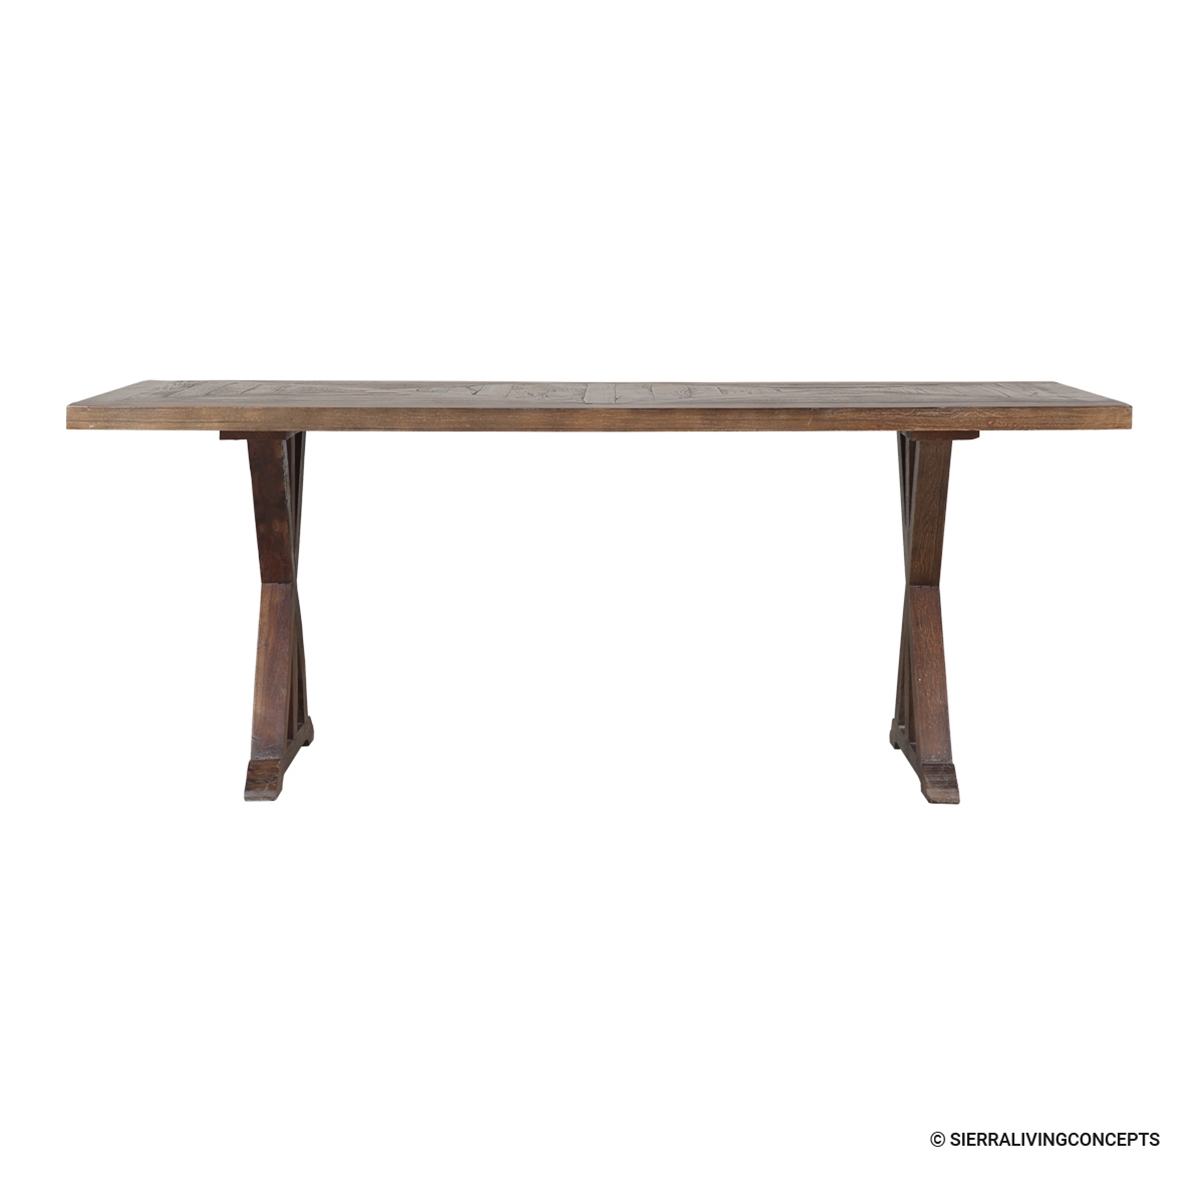 Wawona Farmhouse Style Rustic Solid Wood Dining Table.